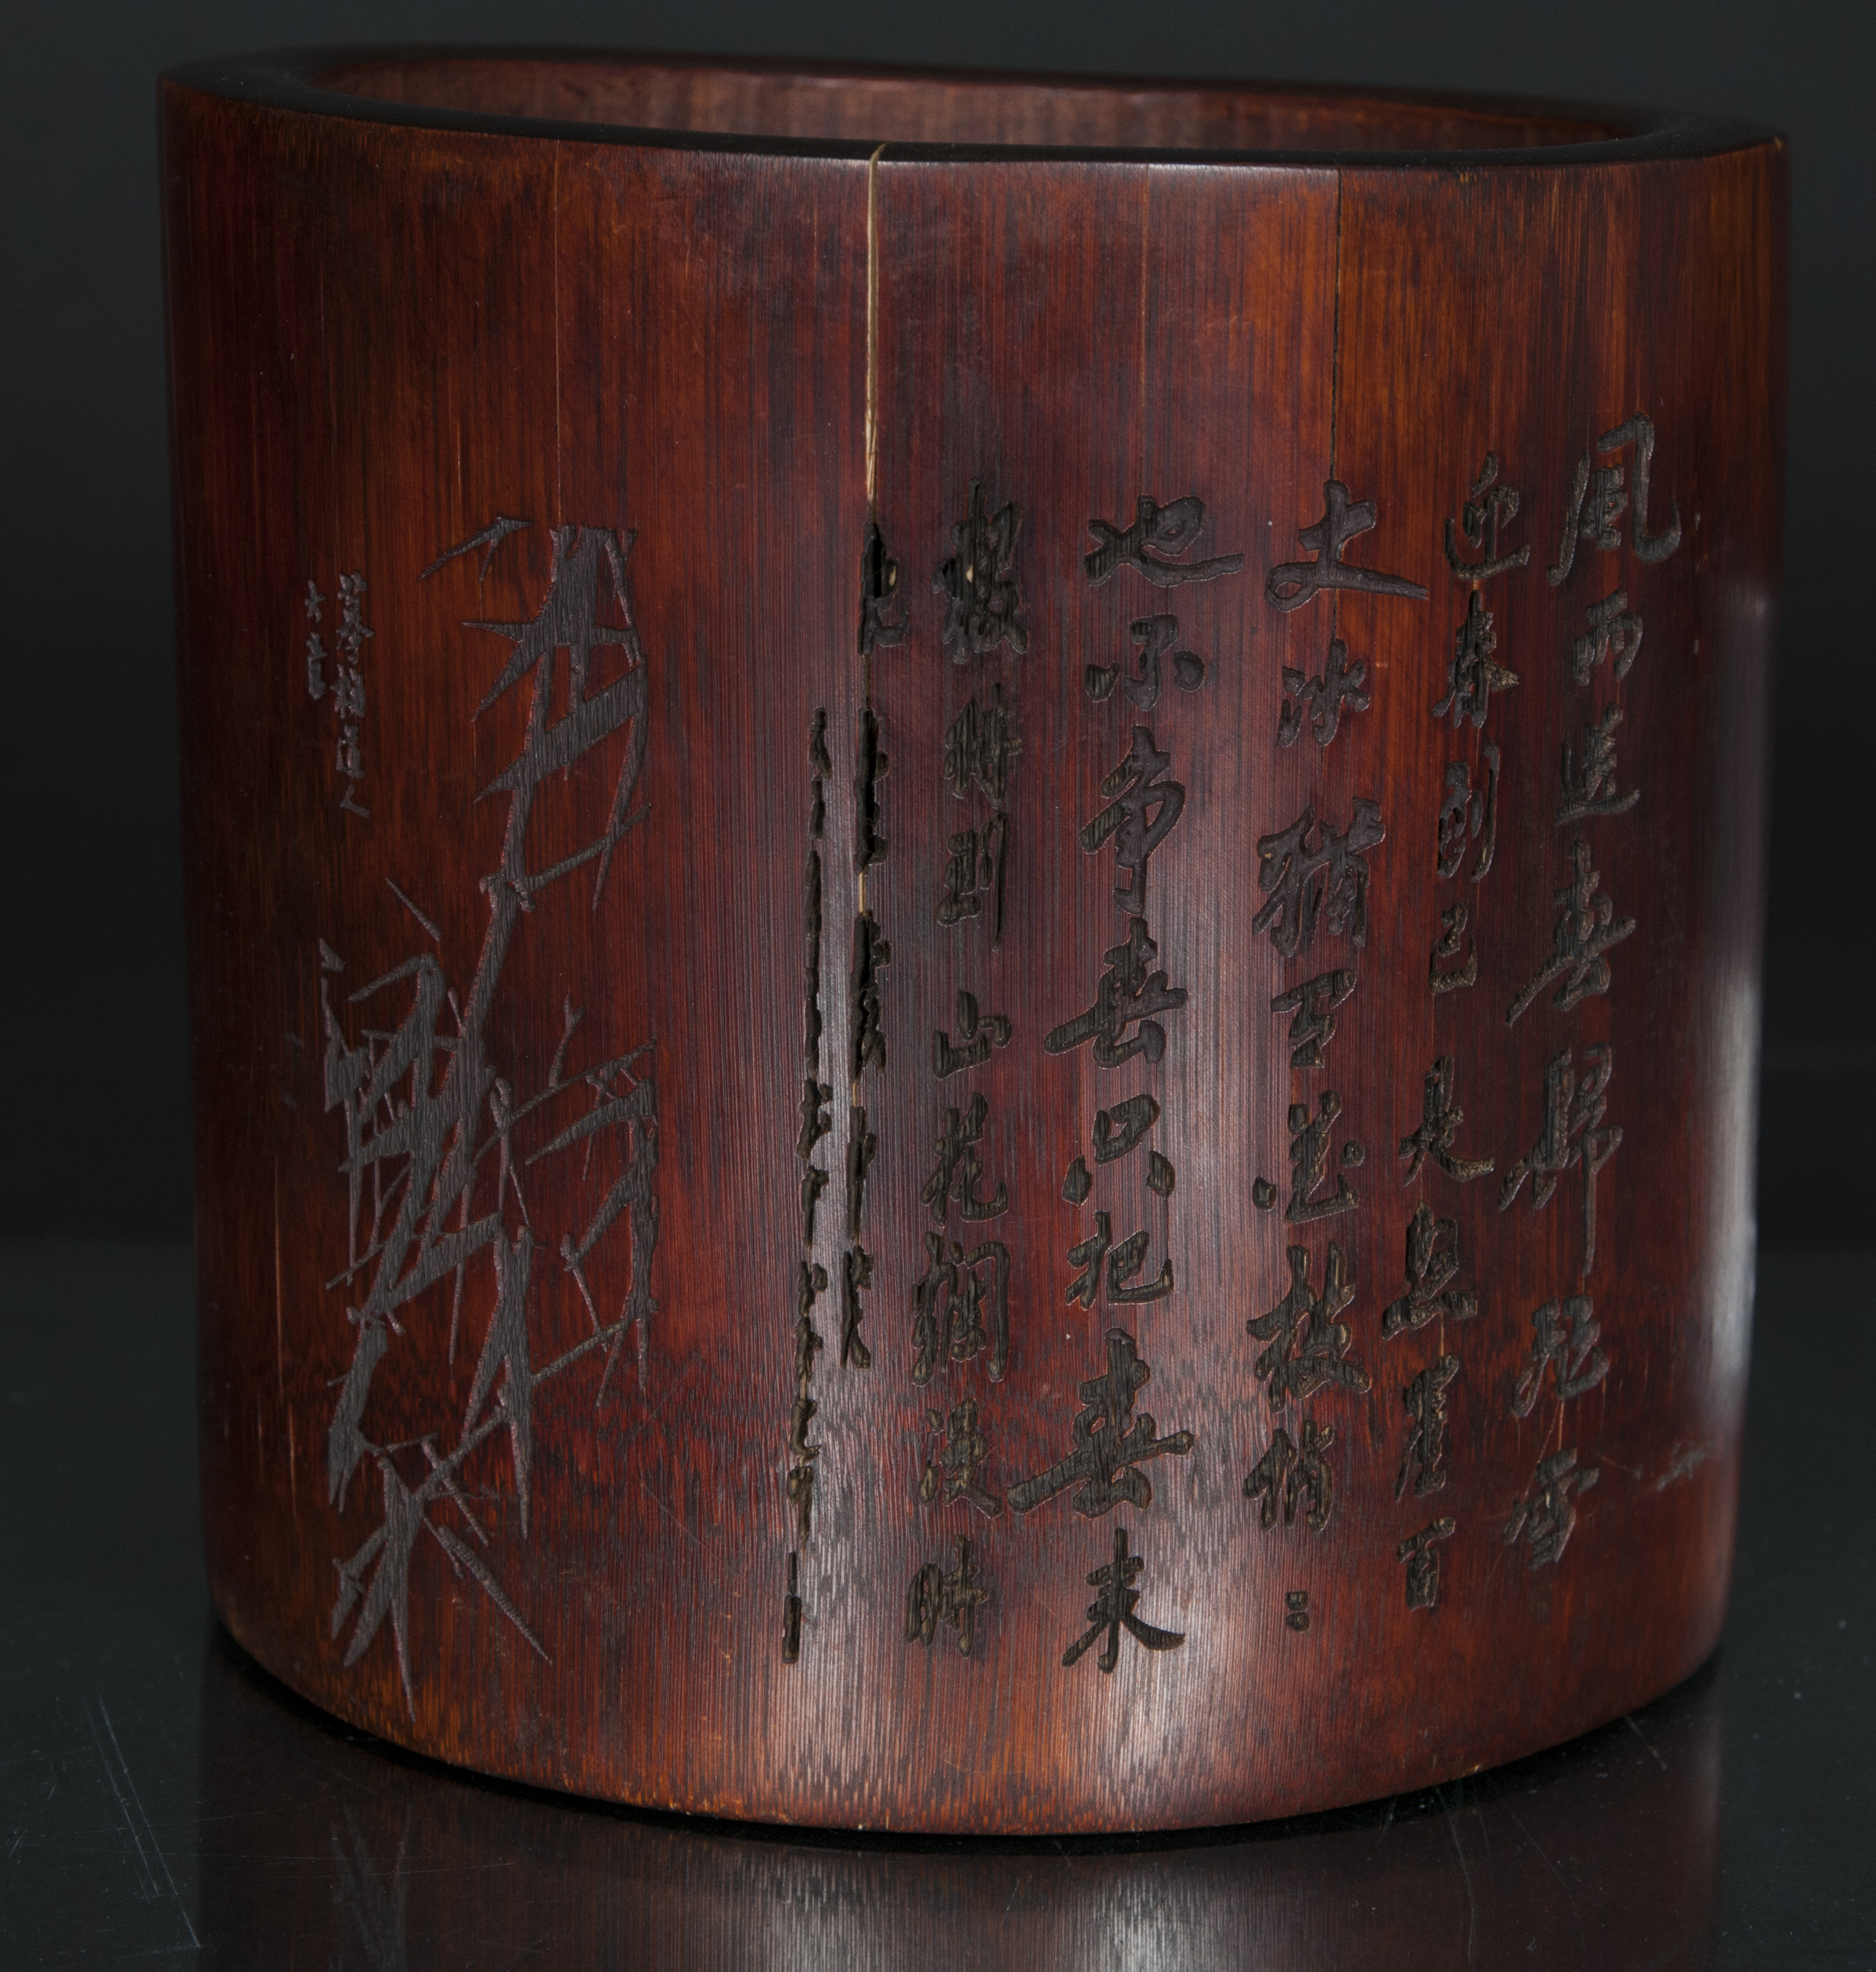 A bamboo brushpot with Mao portrait - image 2